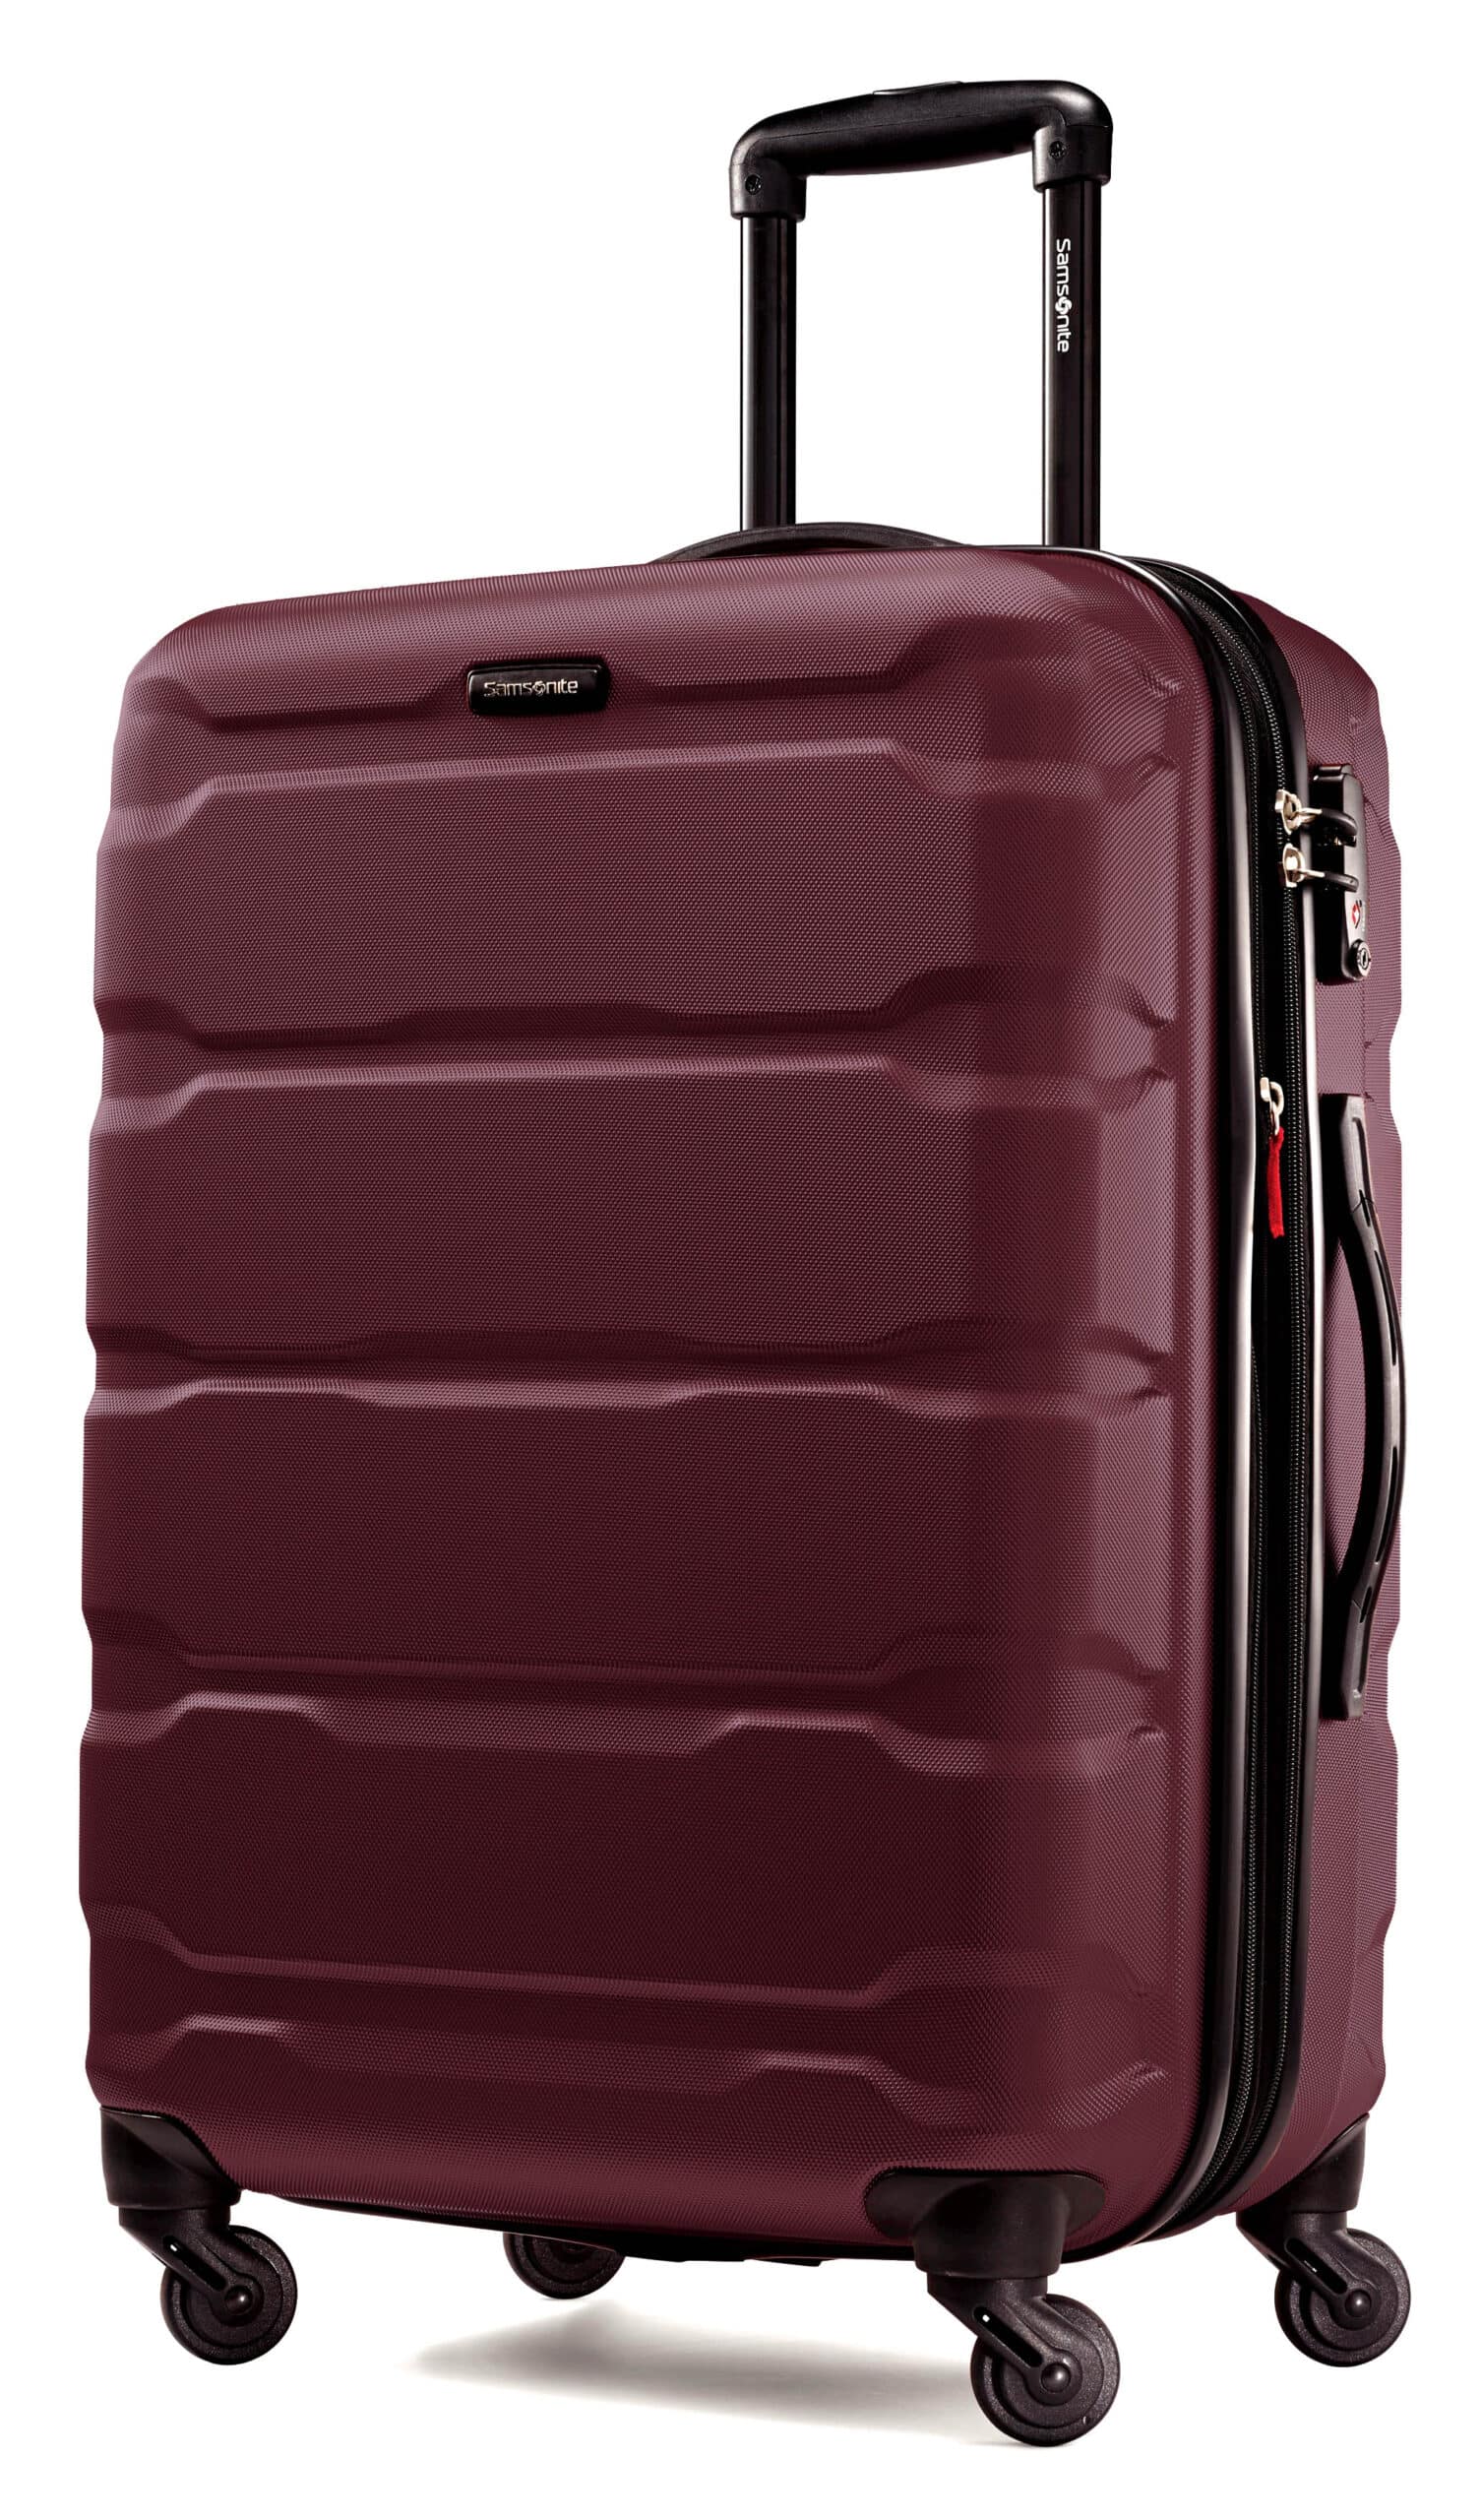 How to Paint Your Samsonite Luggage